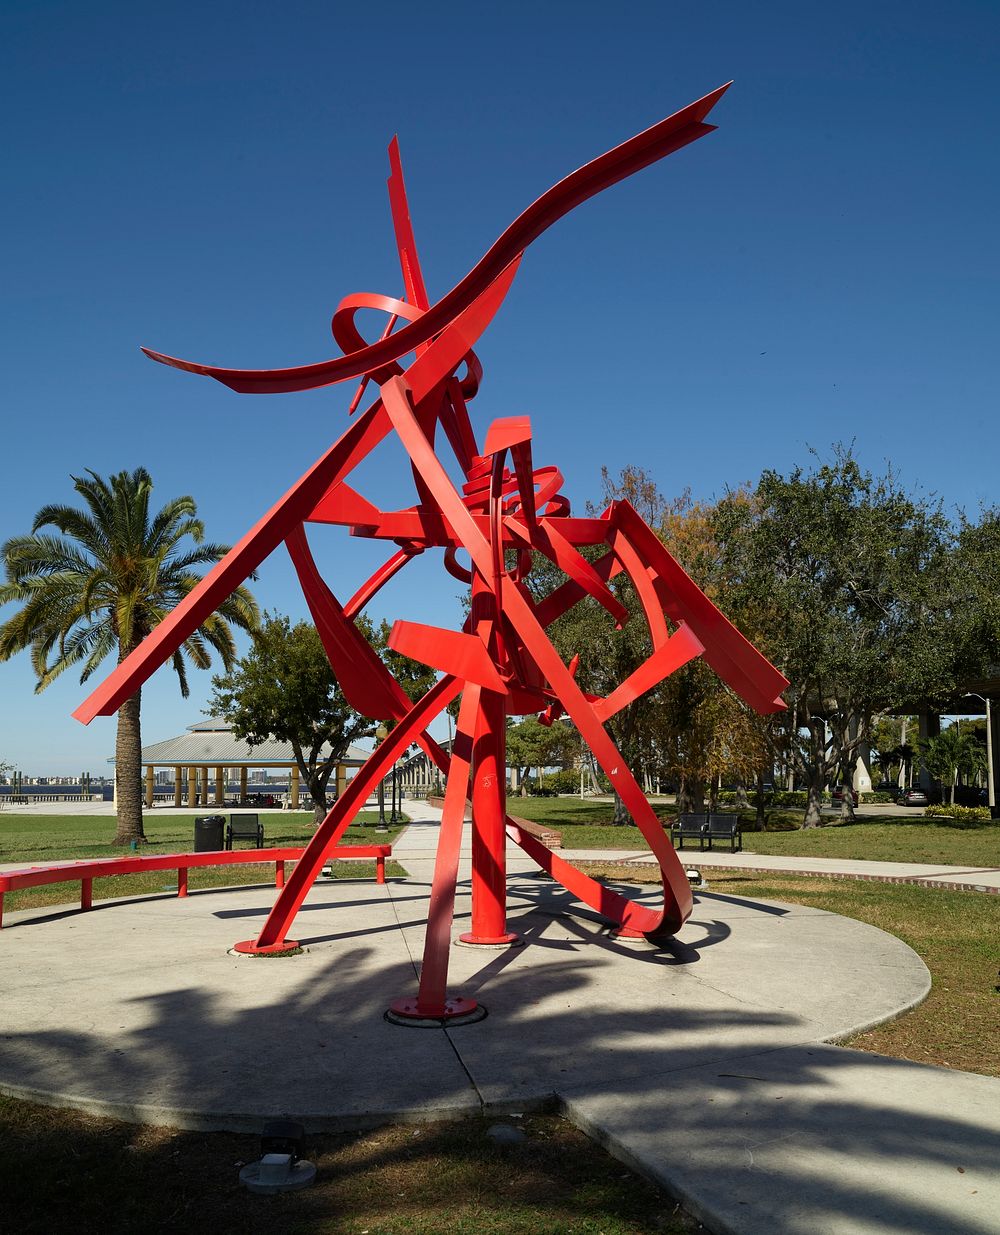                         David Black's 2012 "Fire Dance Sculpture" at Centennial Park in Fort Myers, a small city on…